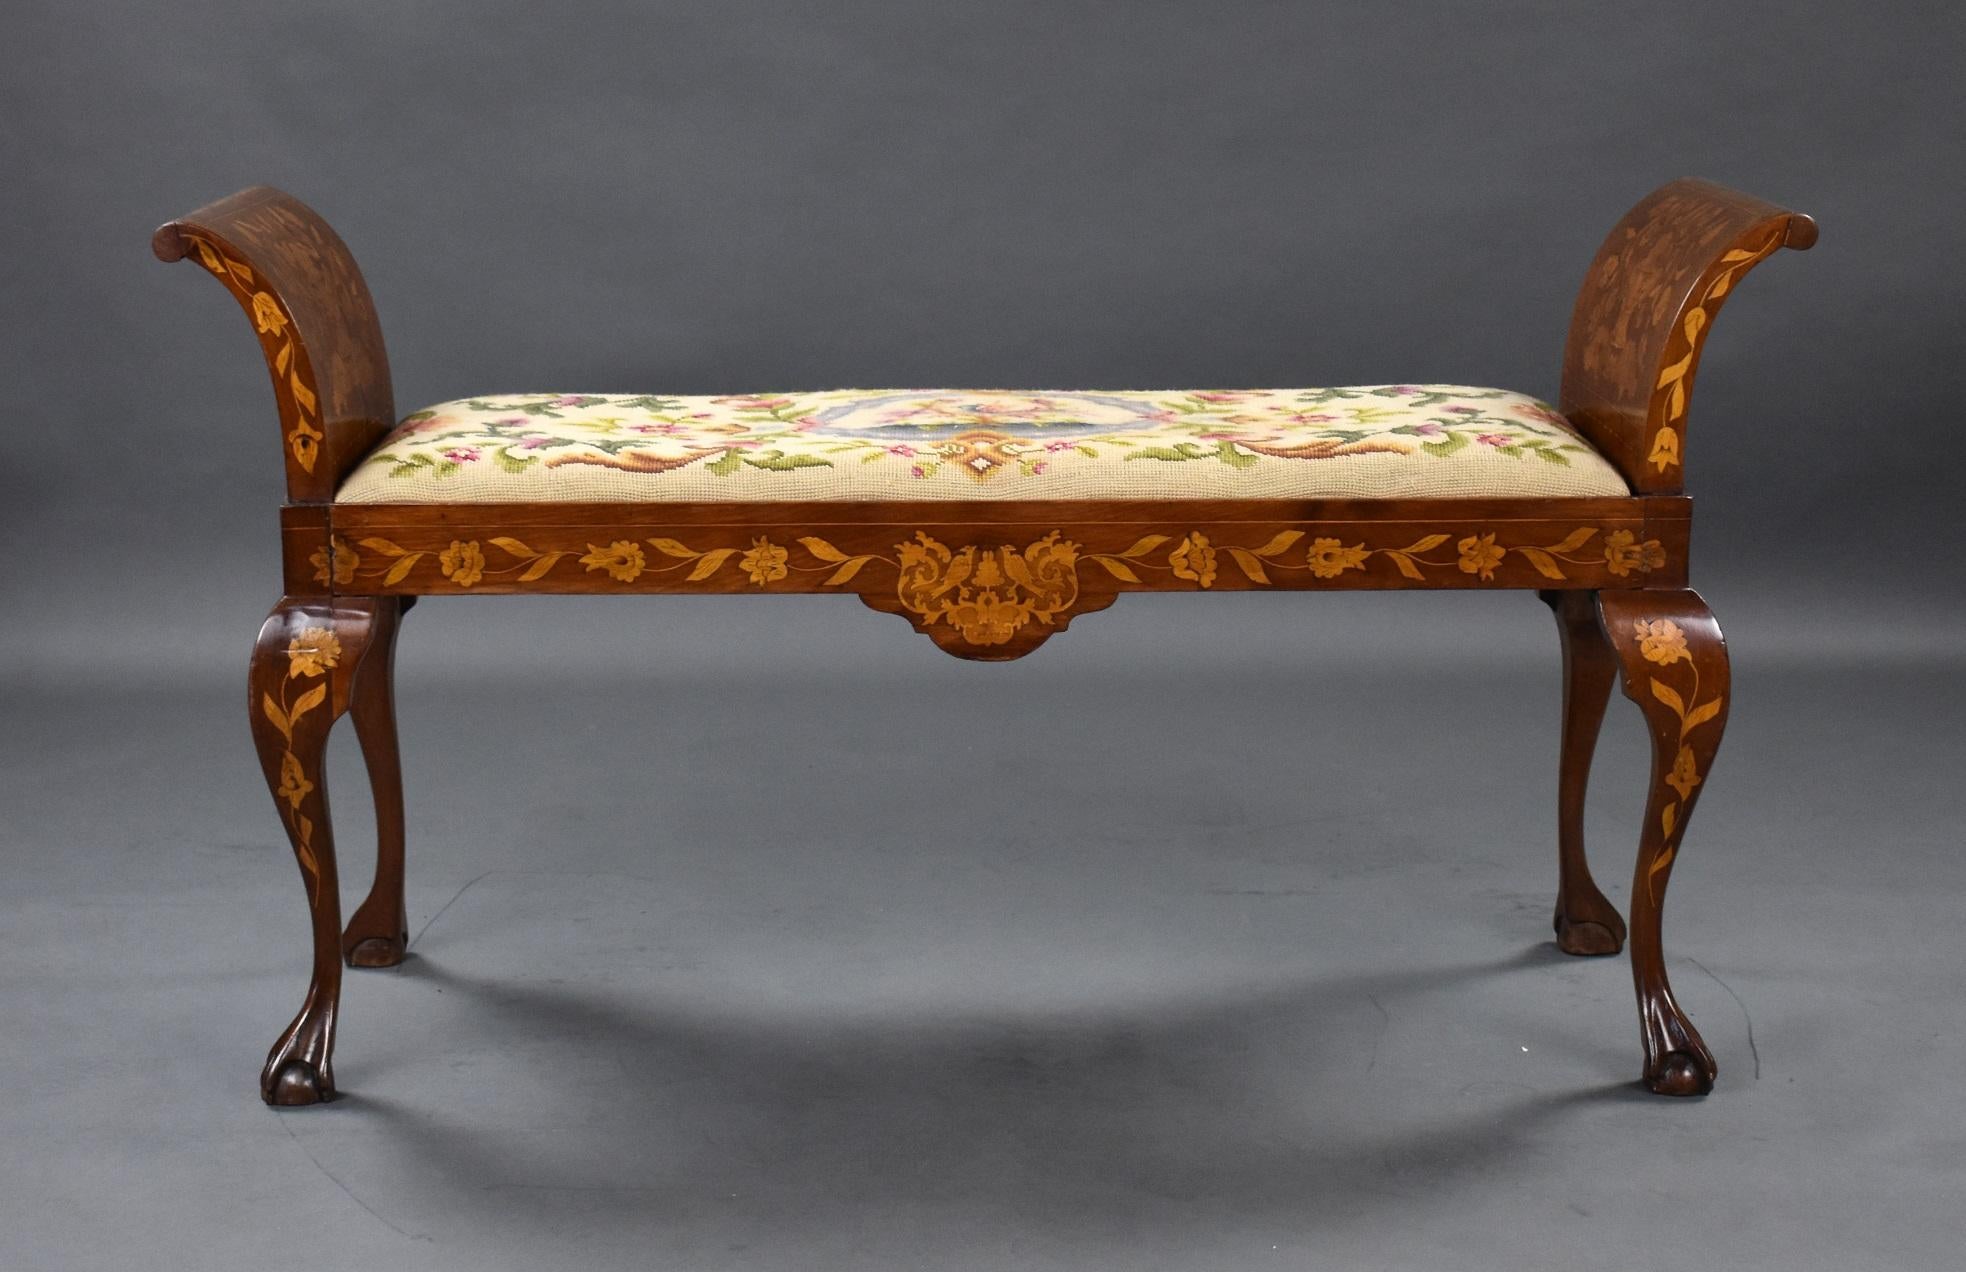 19th century Dutch marquetry window seat with scroll over ends inlaid with marquetry with urns flowers and birds, it has a drop in seat upholstered in floral tapestry. The seat is raised on cabriole legs terminating in elegant ball and claw feet.